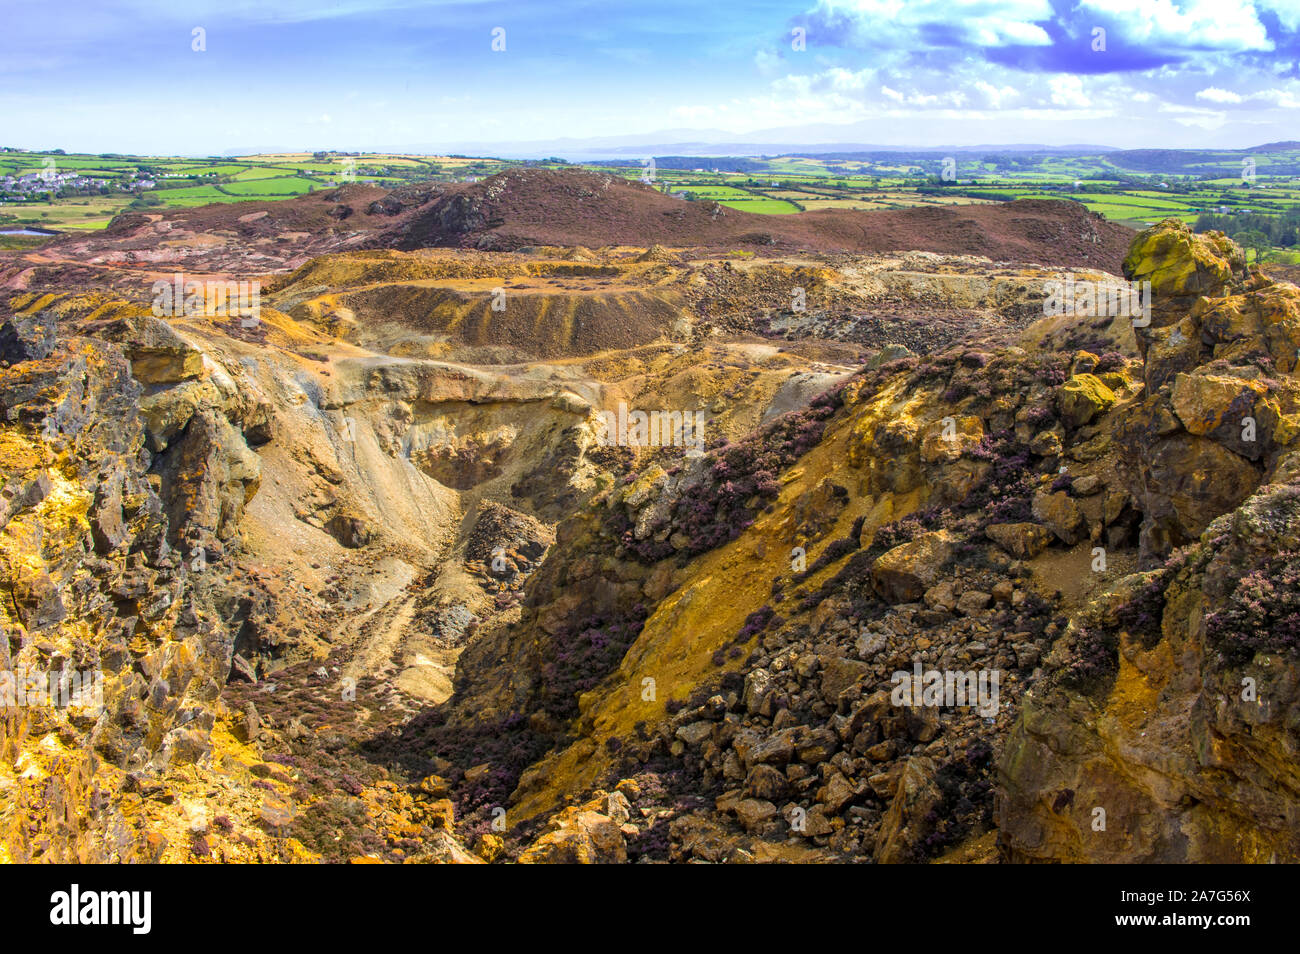 The quarry where copper ore was mined, the ore and spoil were removed using manual labour and hand tools. Stock Photo